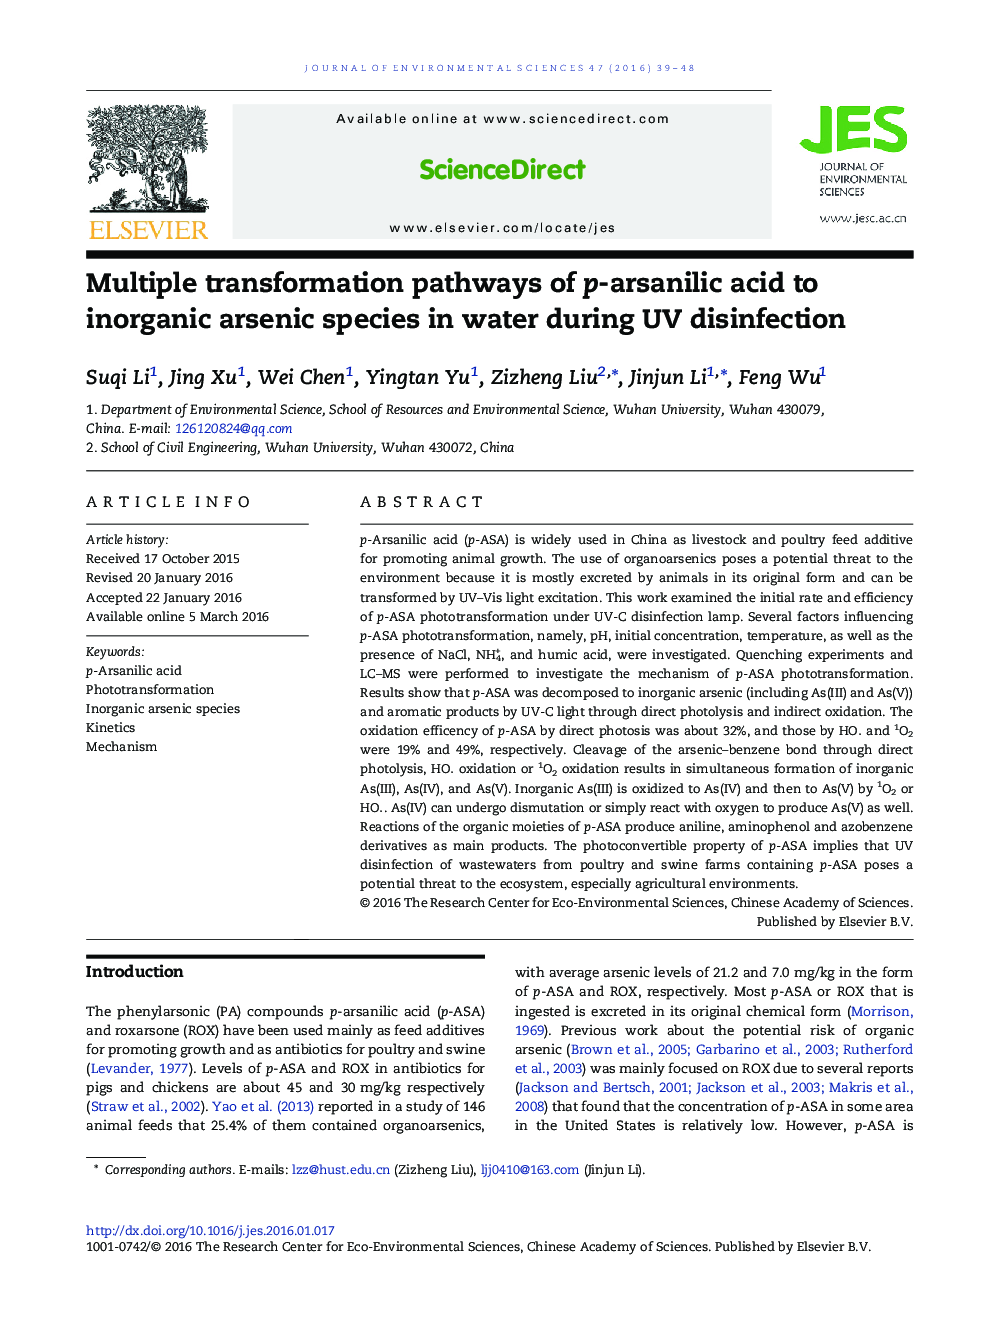 Multiple transformation pathways of p-arsanilic acid to inorganic arsenic species in water during UV disinfection